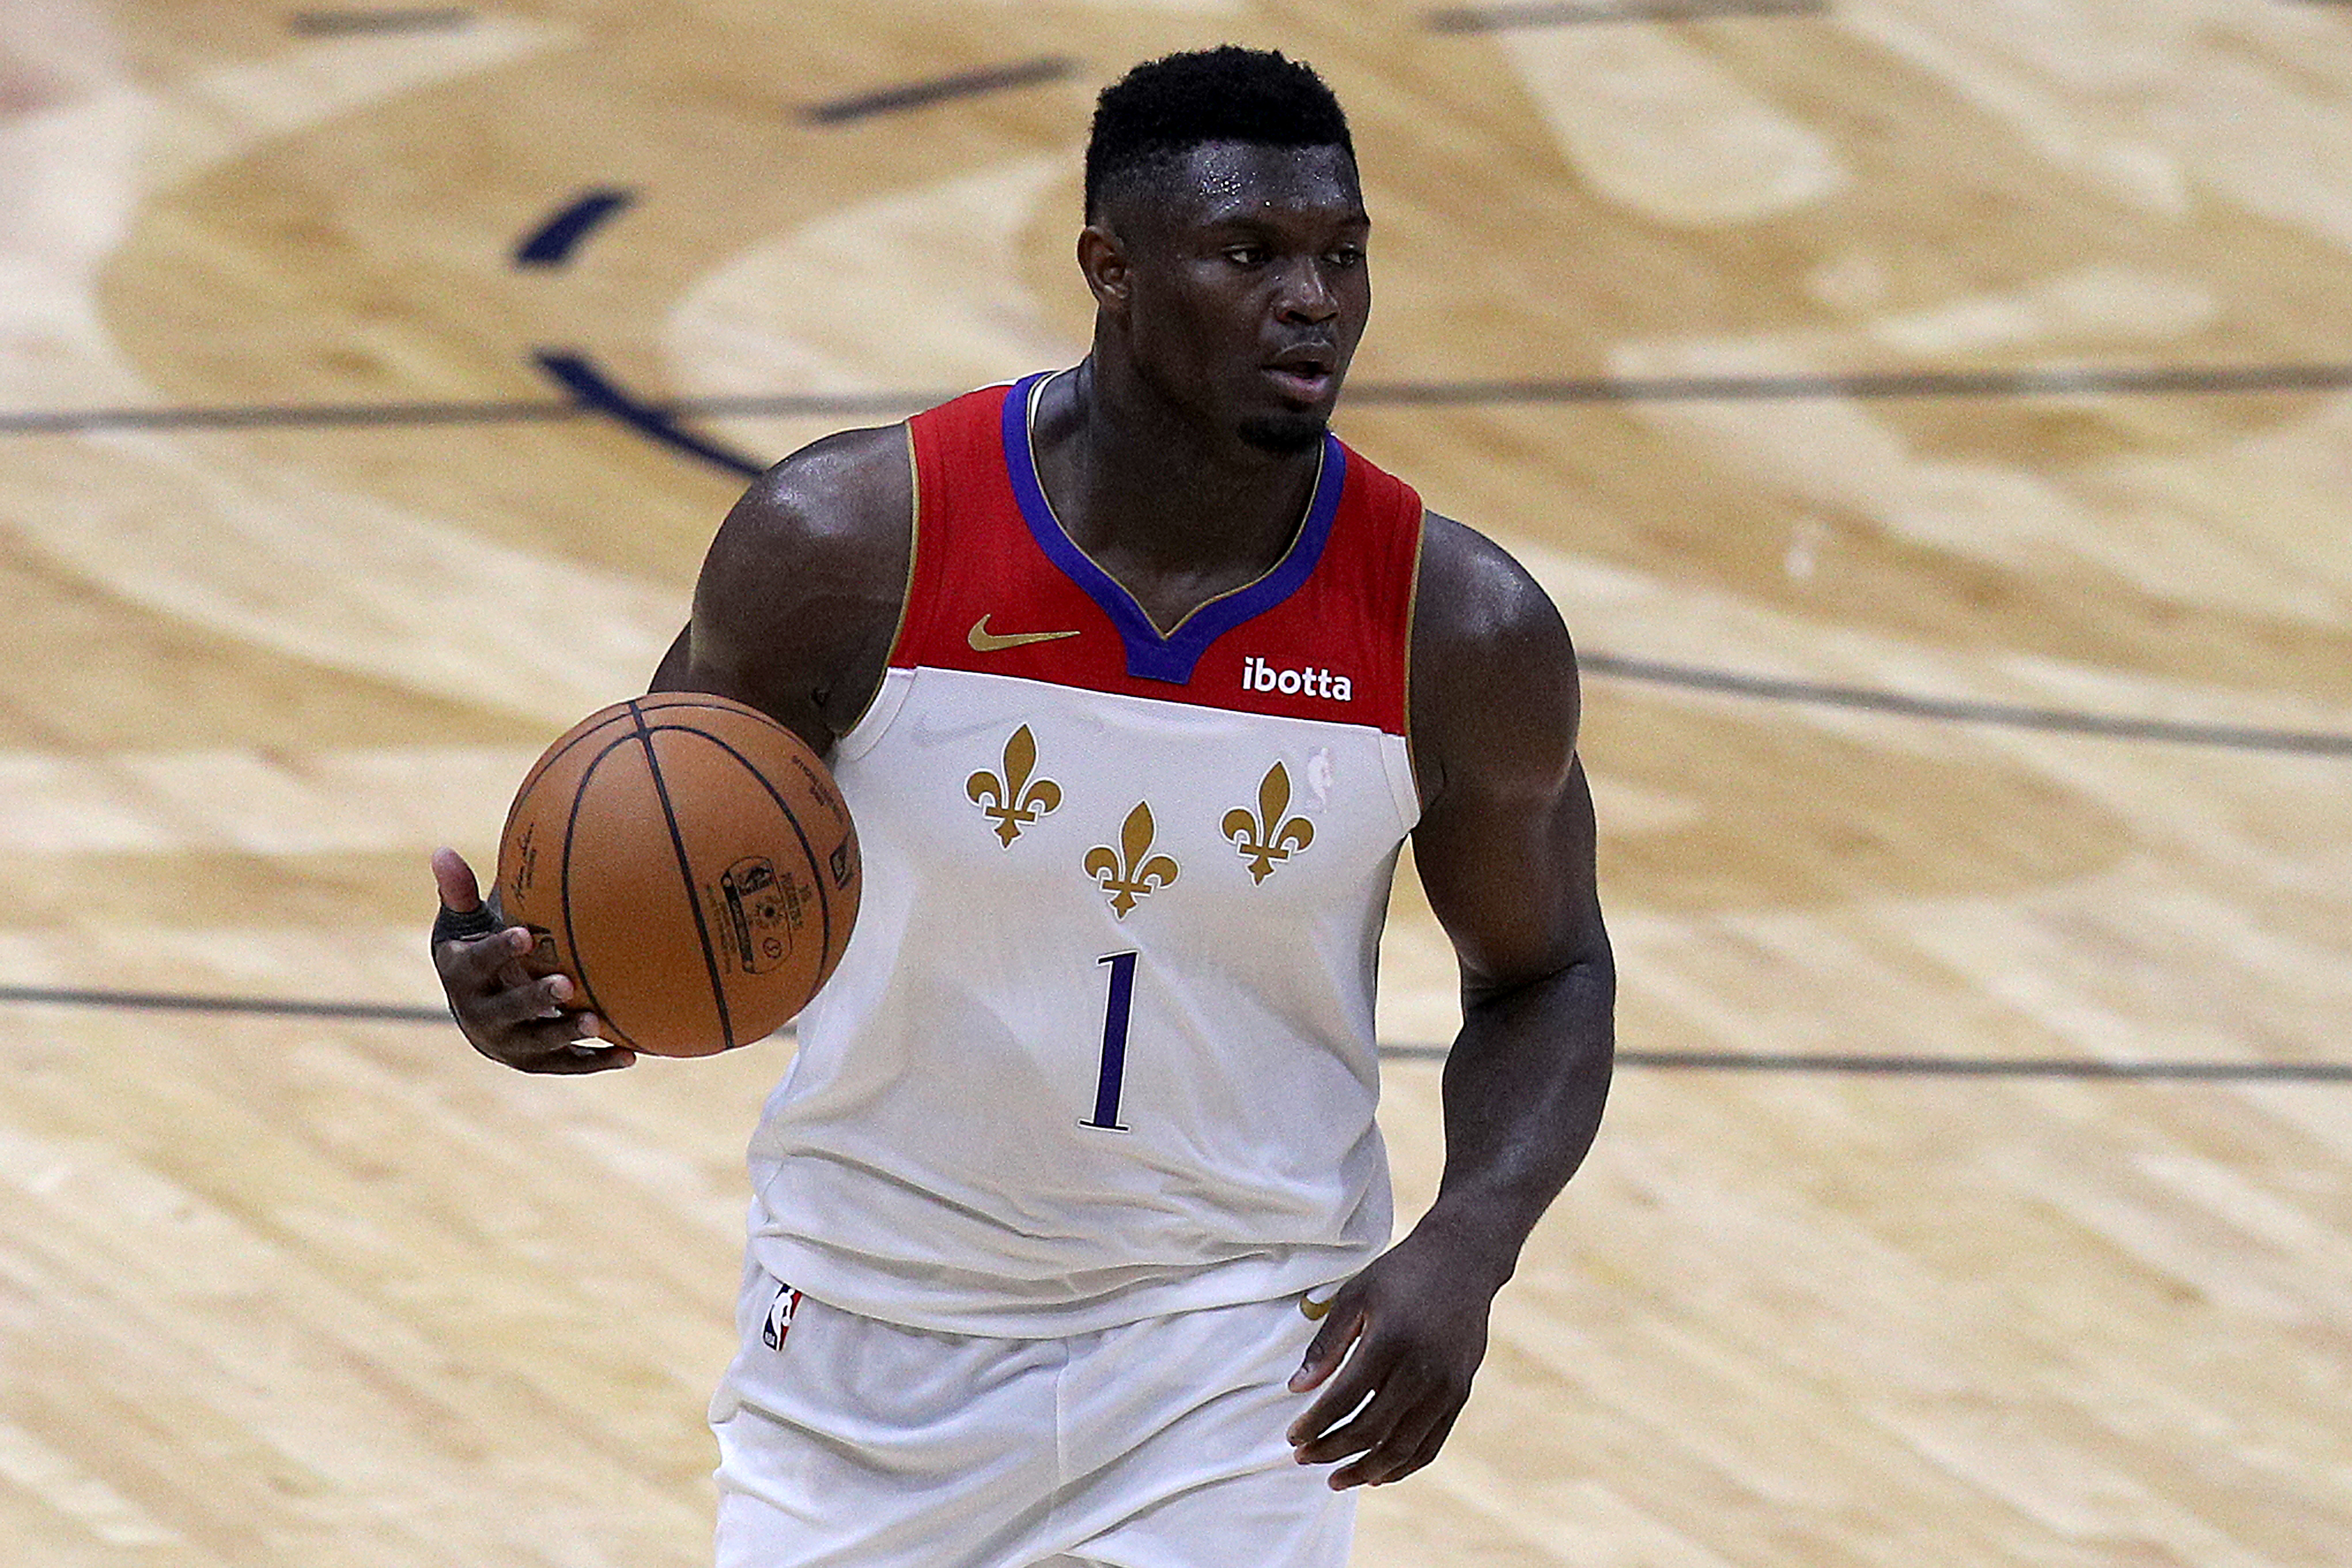 New Orleans Pelicans star Zion Williamson dribbles up the floor during a game in May